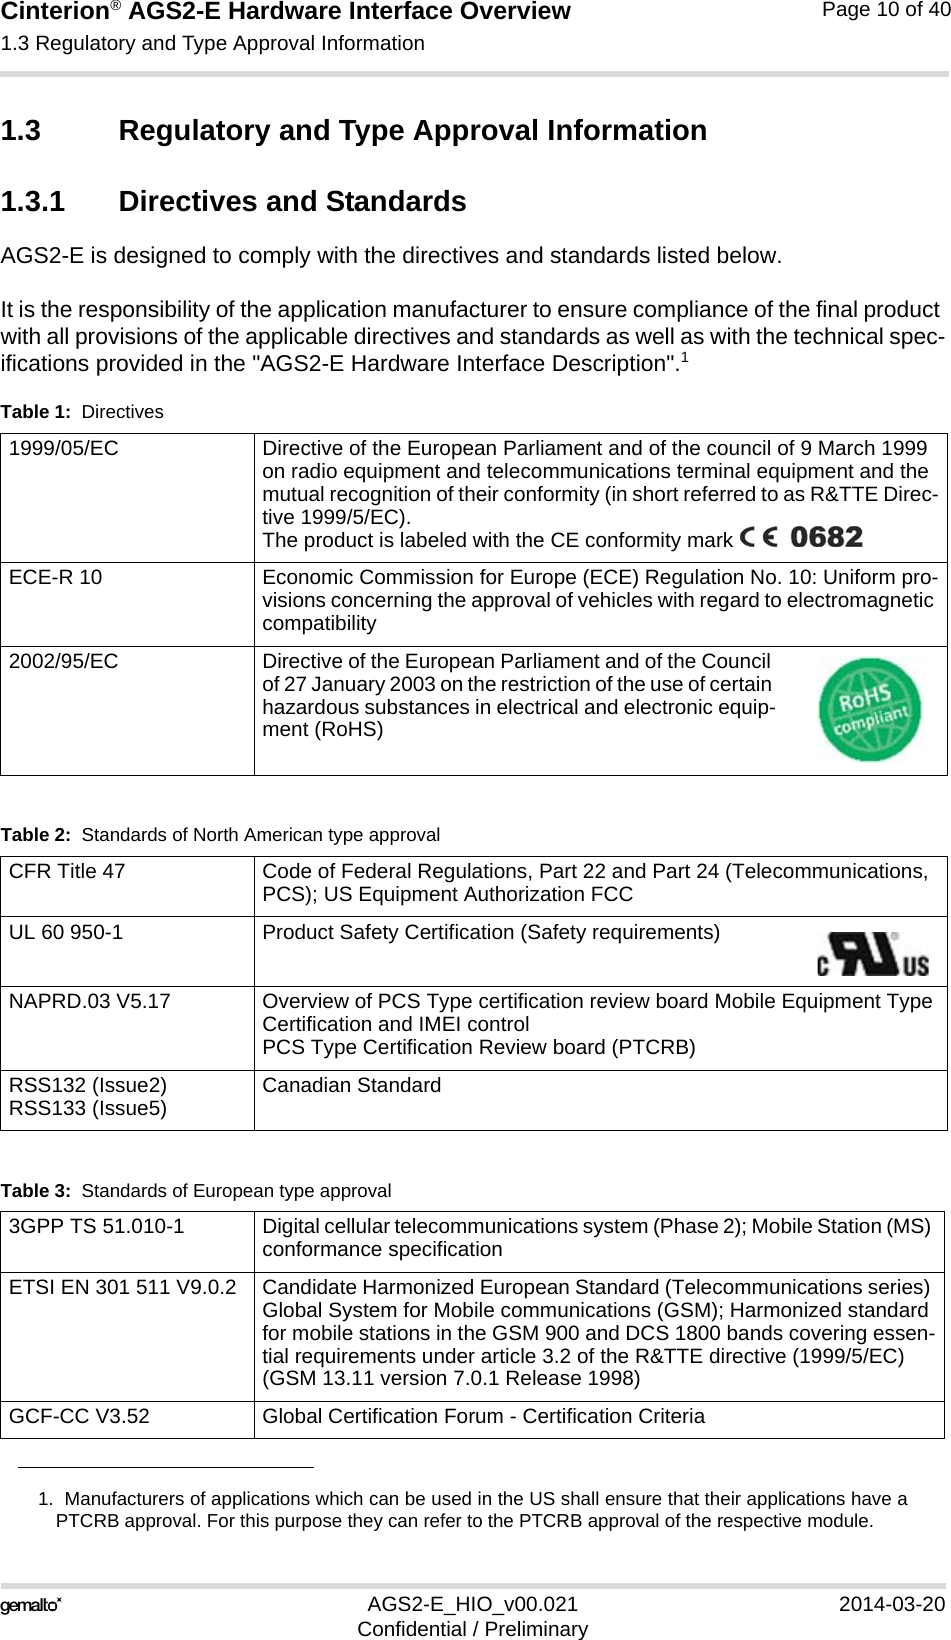 Cinterion® AGS2-E Hardware Interface Overview1.3 Regulatory and Type Approval Information14AGS2-E_HIO_v00.021 2014-03-20Confidential / PreliminaryPage 10 of 401.3 Regulatory and Type Approval Information1.3.1 Directives and StandardsAGS2-E is designed to comply with the directives and standards listed below.It is the responsibility of the application manufacturer to ensure compliance of the final product with all provisions of the applicable directives and standards as well as with the technical spec-ifications provided in the &quot;AGS2-E Hardware Interface Description&quot;.11.  Manufacturers of applications which can be used in the US shall ensure that their applications have aPTCRB approval. For this purpose they can refer to the PTCRB approval of the respective module. Table 1:  Directives1999/05/EC Directive of the European Parliament and of the council of 9 March 1999 on radio equipment and telecommunications terminal equipment and the mutual recognition of their conformity (in short referred to as R&amp;TTE Direc-tive 1999/5/EC).The product is labeled with the CE conformity mark ECE-R 10 Economic Commission for Europe (ECE) Regulation No. 10: Uniform pro-visions concerning the approval of vehicles with regard to electromagnetic compatibility2002/95/EC  Directive of the European Parliament and of the Council of 27 January 2003 on the restriction of the use of certain hazardous substances in electrical and electronic equip-ment (RoHS)Table 2:  Standards of North American type approvalCFR Title 47 Code of Federal Regulations, Part 22 and Part 24 (Telecommunications, PCS); US Equipment Authorization FCCUL 60 950-1 Product Safety Certification (Safety requirements)NAPRD.03 V5.17 Overview of PCS Type certification review board Mobile Equipment Type Certification and IMEI controlPCS Type Certification Review board (PTCRB)RSS132 (Issue2)RSS133 (Issue5) Canadian StandardTable 3:  Standards of European type approval3GPP TS 51.010-1 Digital cellular telecommunications system (Phase 2); Mobile Station (MS) conformance specificationETSI EN 301 511 V9.0.2 Candidate Harmonized European Standard (Telecommunications series) Global System for Mobile communications (GSM); Harmonized standard for mobile stations in the GSM 900 and DCS 1800 bands covering essen-tial requirements under article 3.2 of the R&amp;TTE directive (1999/5/EC) (GSM 13.11 version 7.0.1 Release 1998)GCF-CC V3.52 Global Certification Forum - Certification Criteria